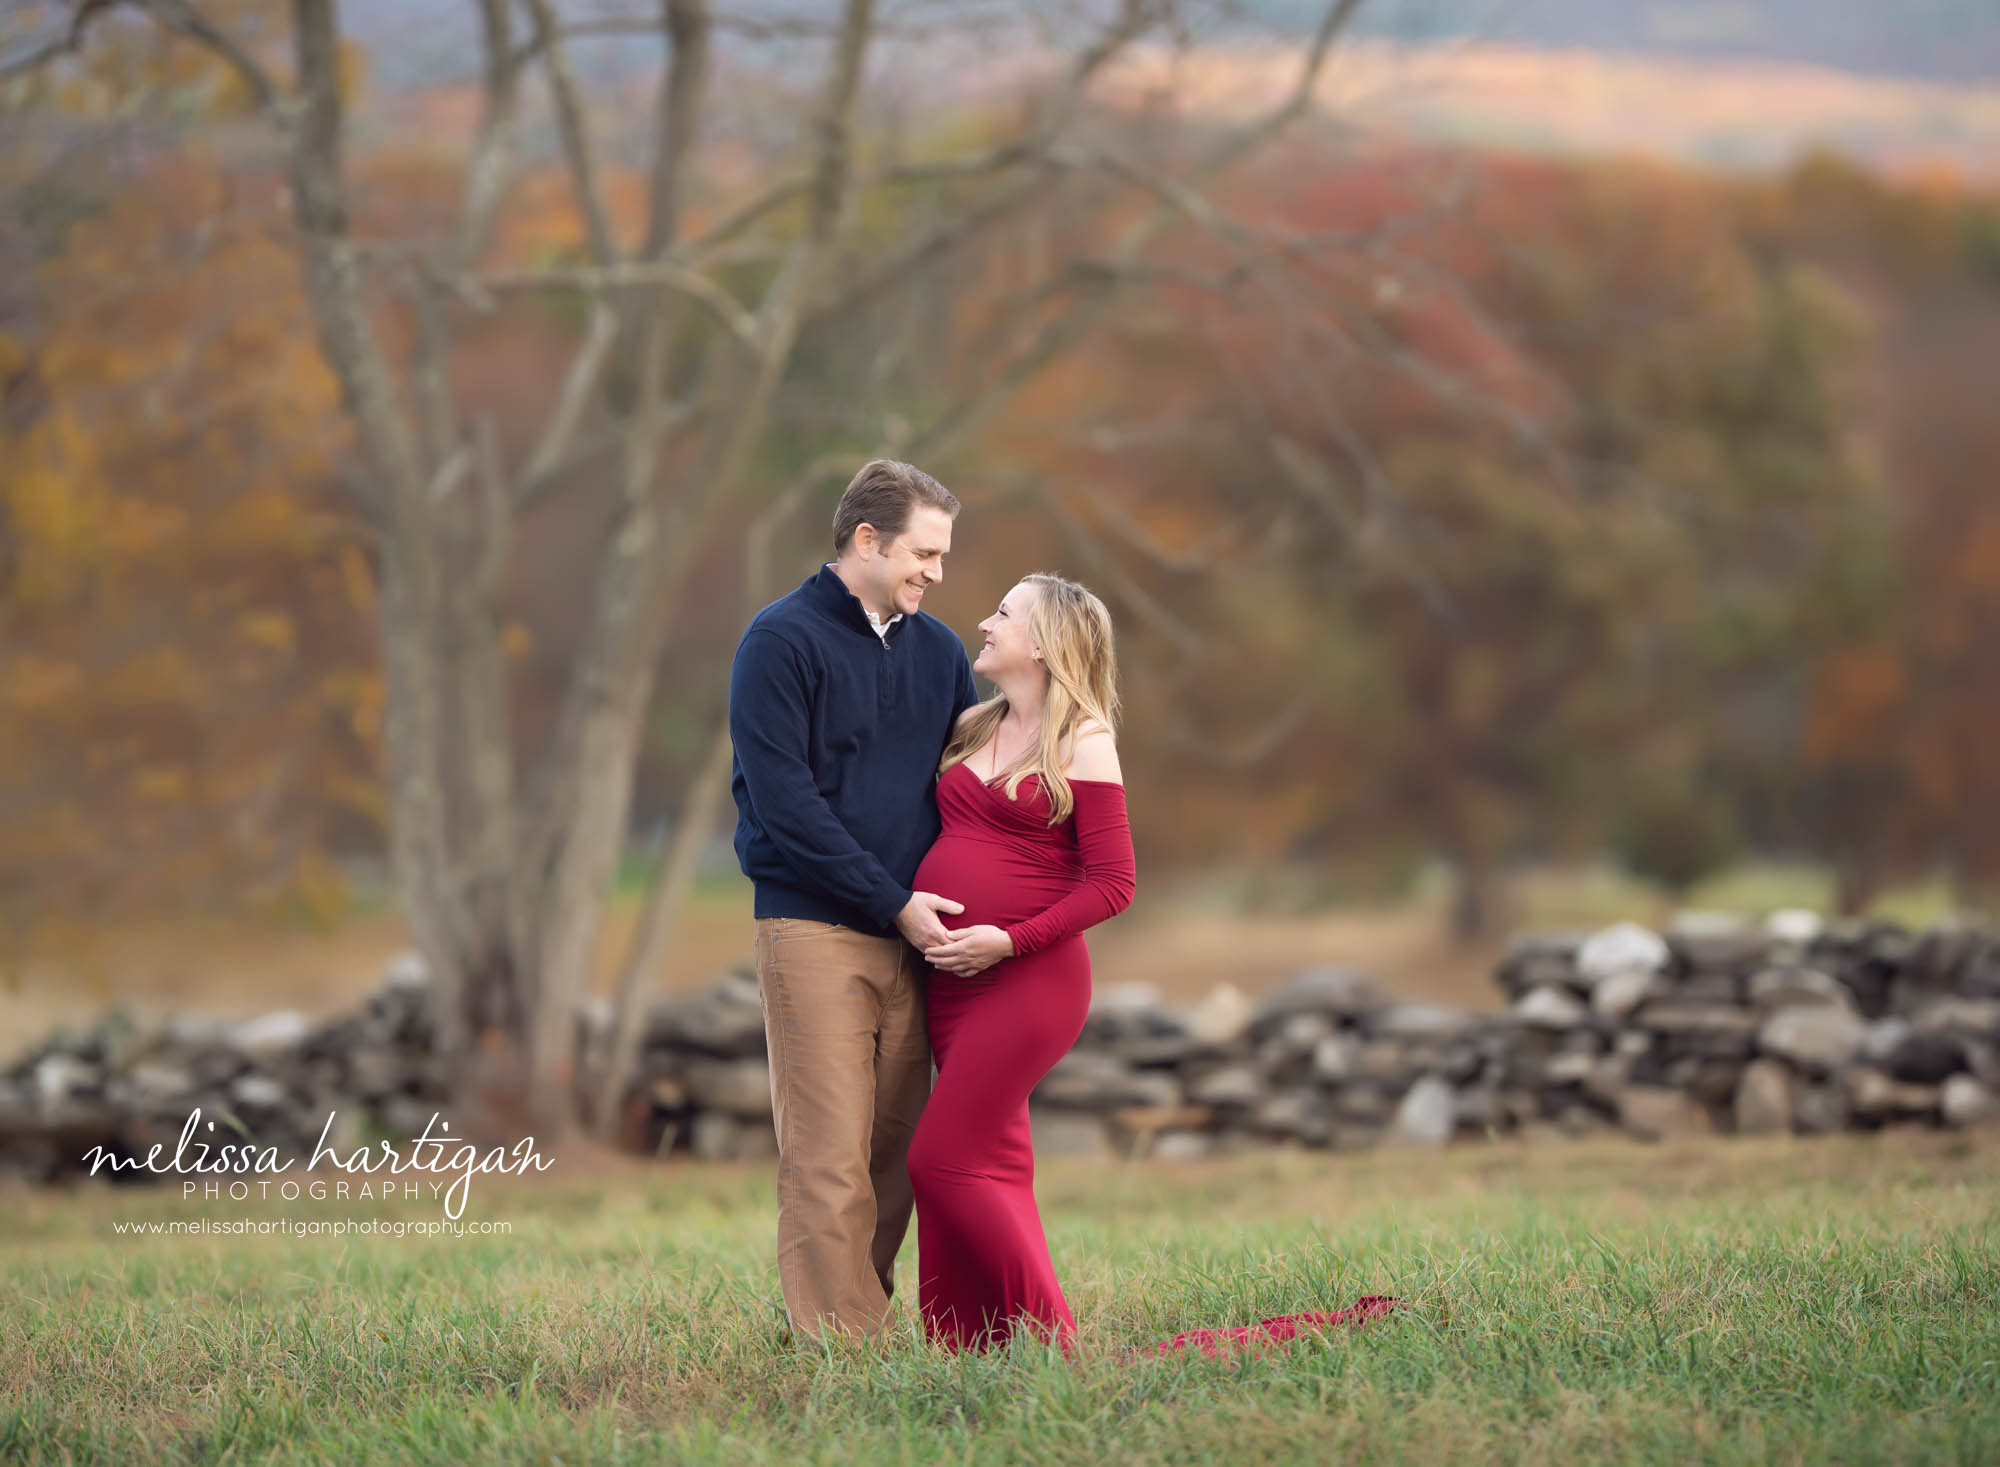 mom and dad to be handing baby bump looking at eachother laughing smiling. maternity newborn photography CT